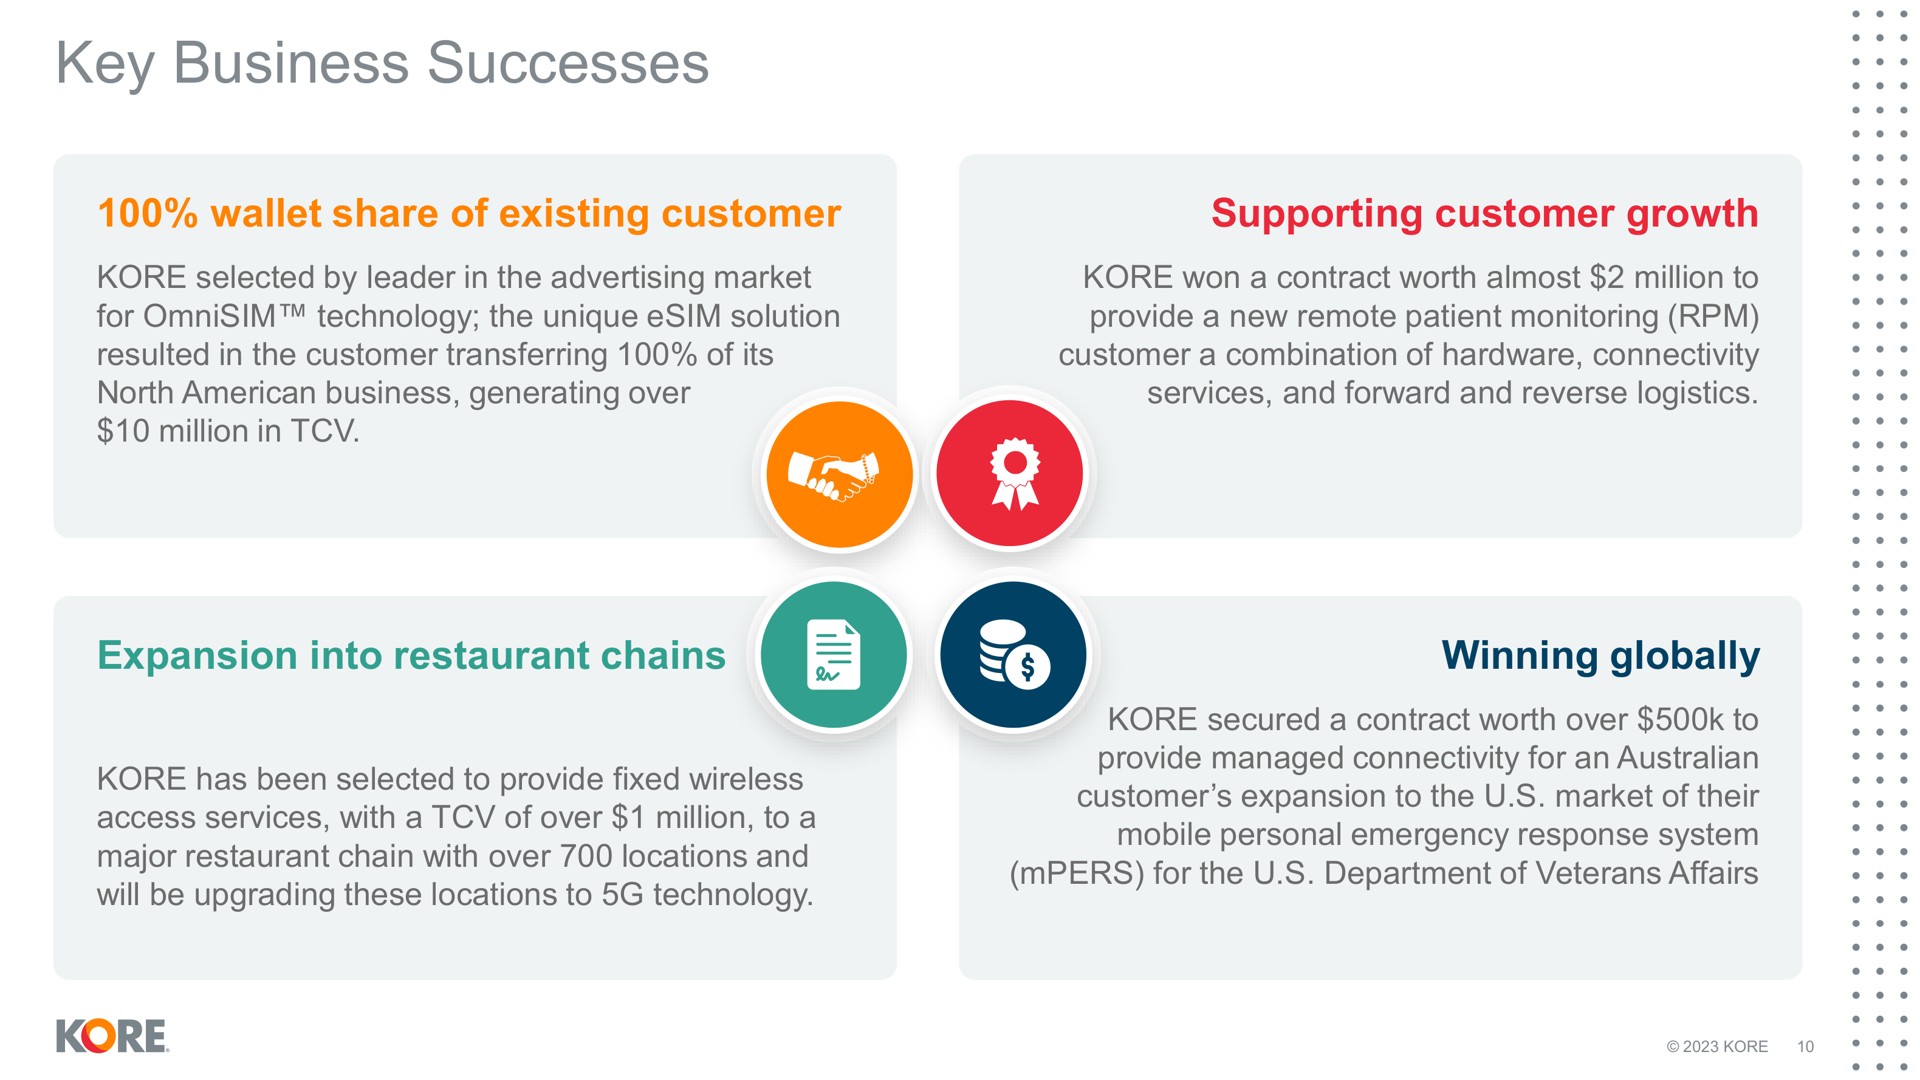 key business successes wallet share of existing customer supporting customer growth a expansion into restaurant chains winning globally | Kore